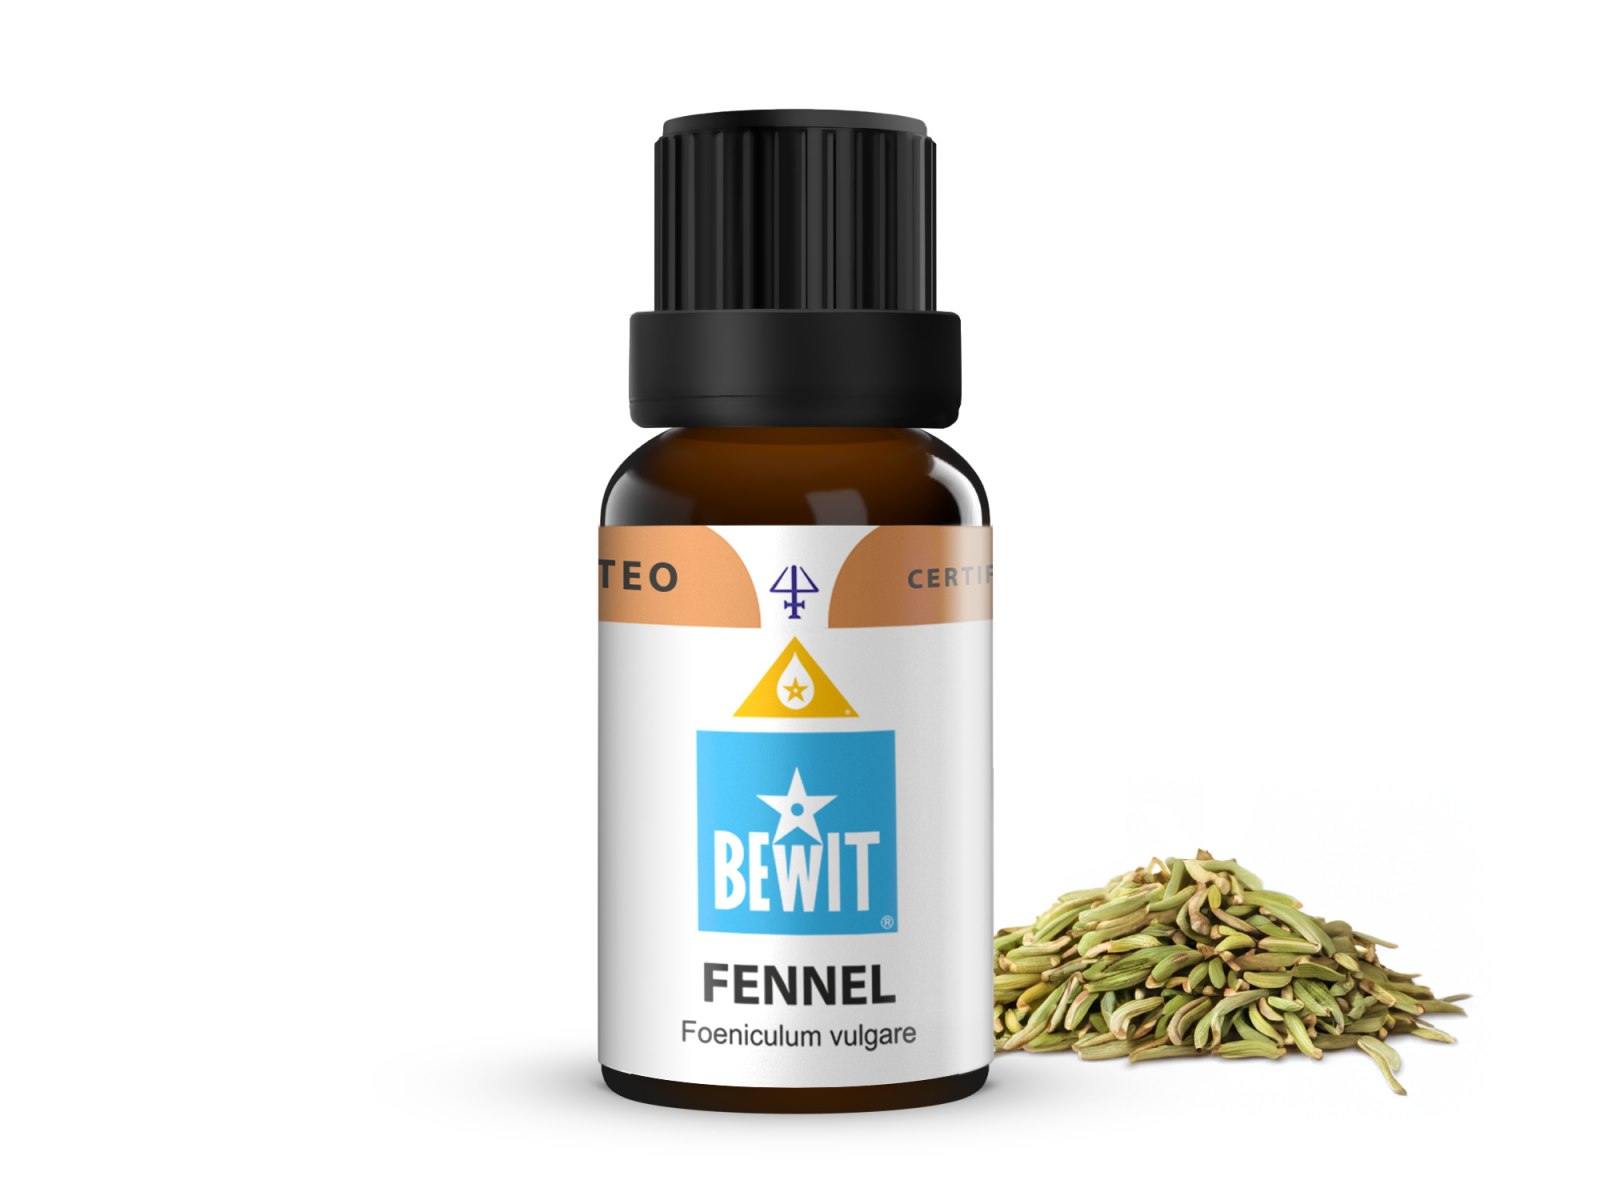 Fennel - This is a 100% pure essential oil